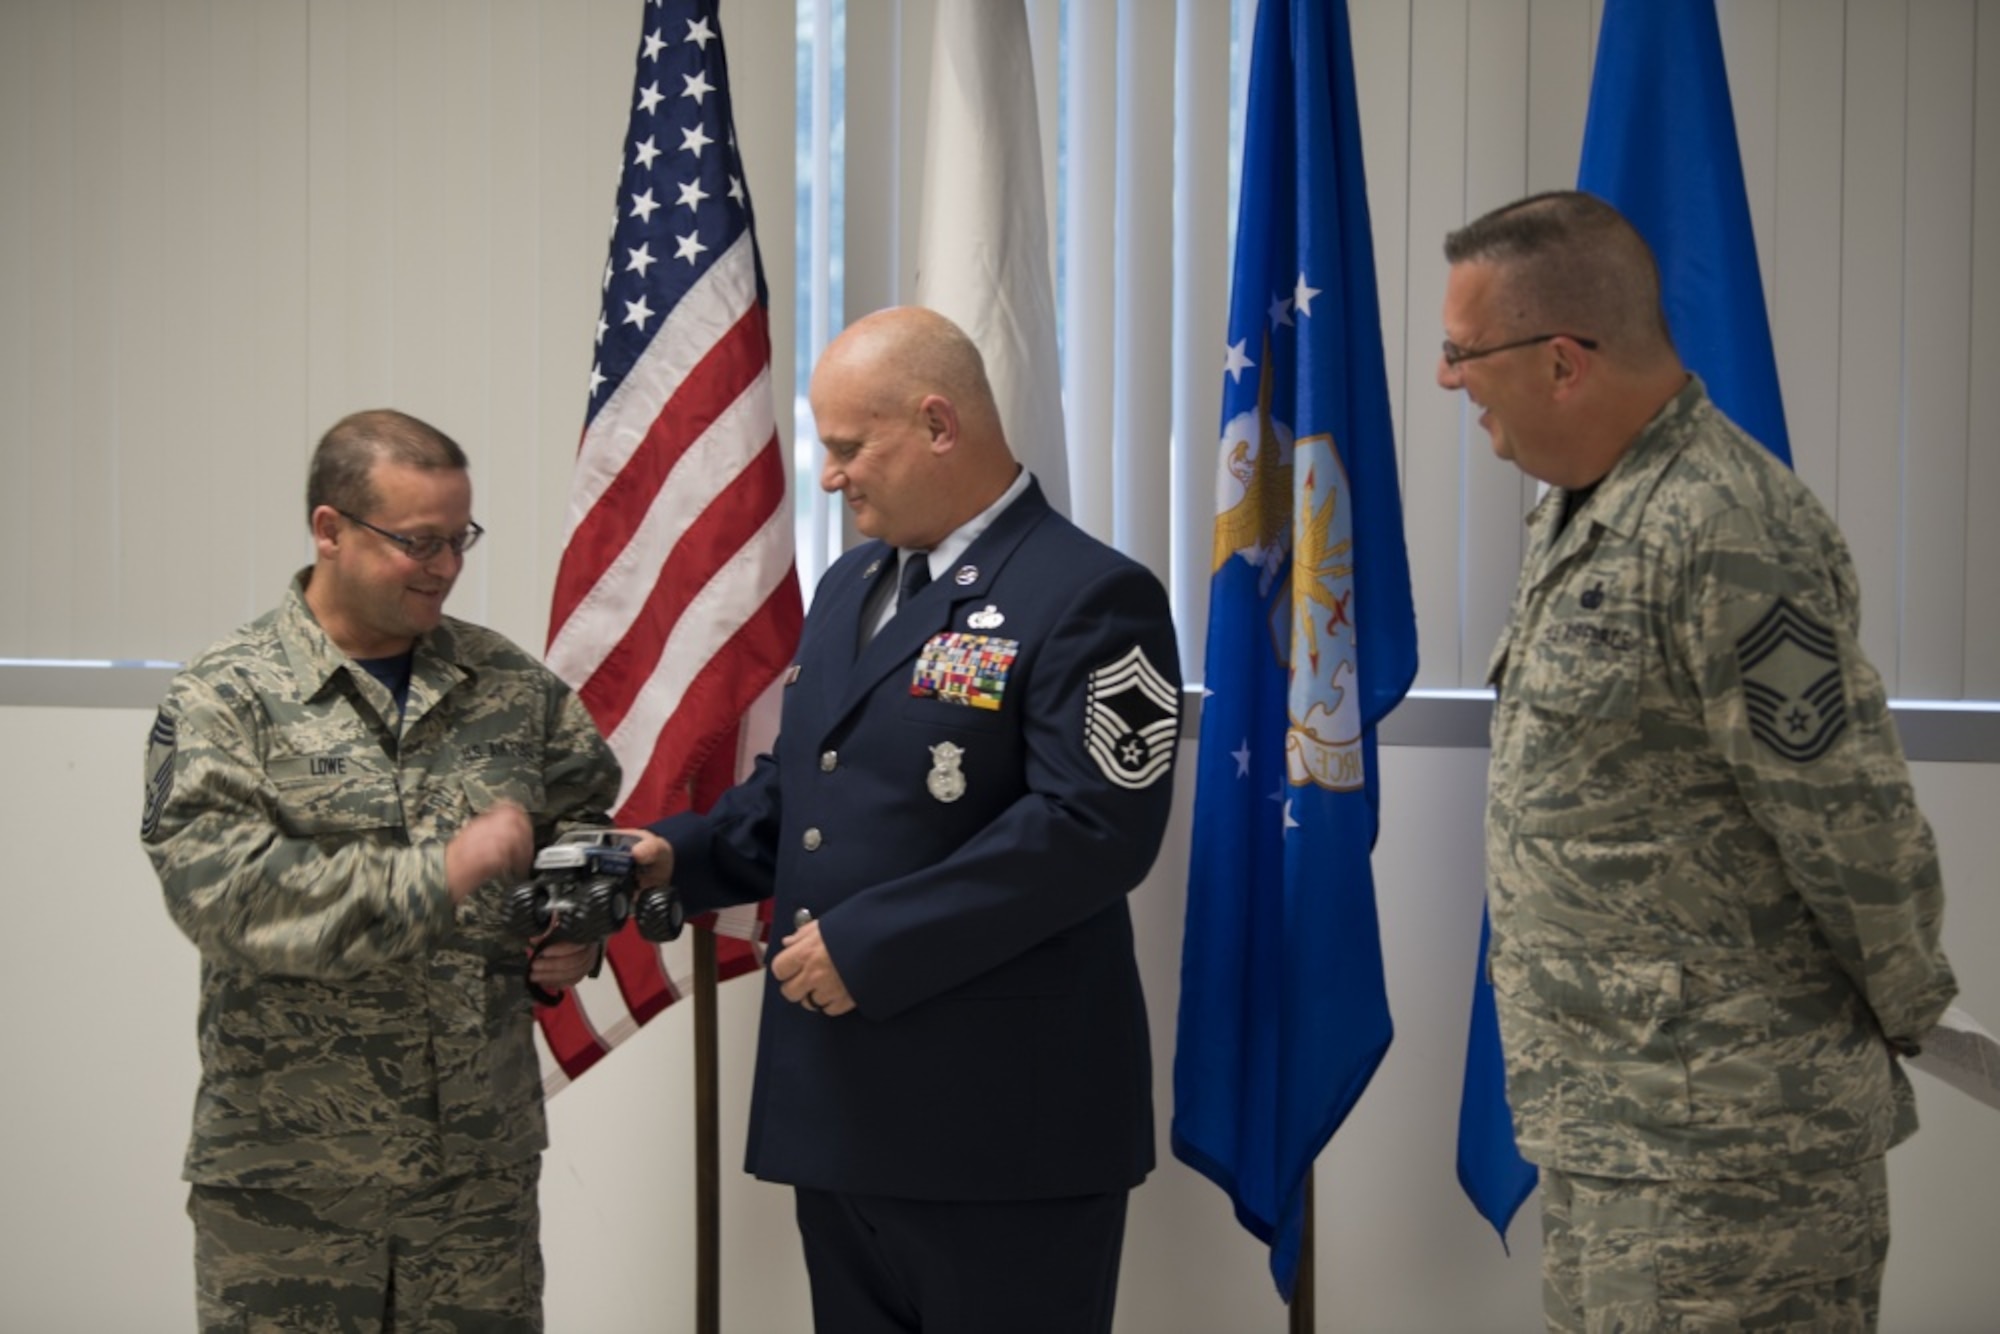 Chief Master Sgt. John Lowe passes the symbolic “Jeep Chief” truck to Chief Master Sgt. P. Wayne Hughes during Hughes’ promotion ceremony held June 3, 2017 at McLaughlin Air National Guard Base, Charleston, W.Va. The “Jeep Chief” is the newest promoted chief on base and is symbolic of a newly promoted individual in the military. The 130th Airlift Wing Chief’s Council presents this token to new Chiefs as a reminder of their role and responsibility in the position. (U.S. Air National photo by Capt. Holli Nelson) 